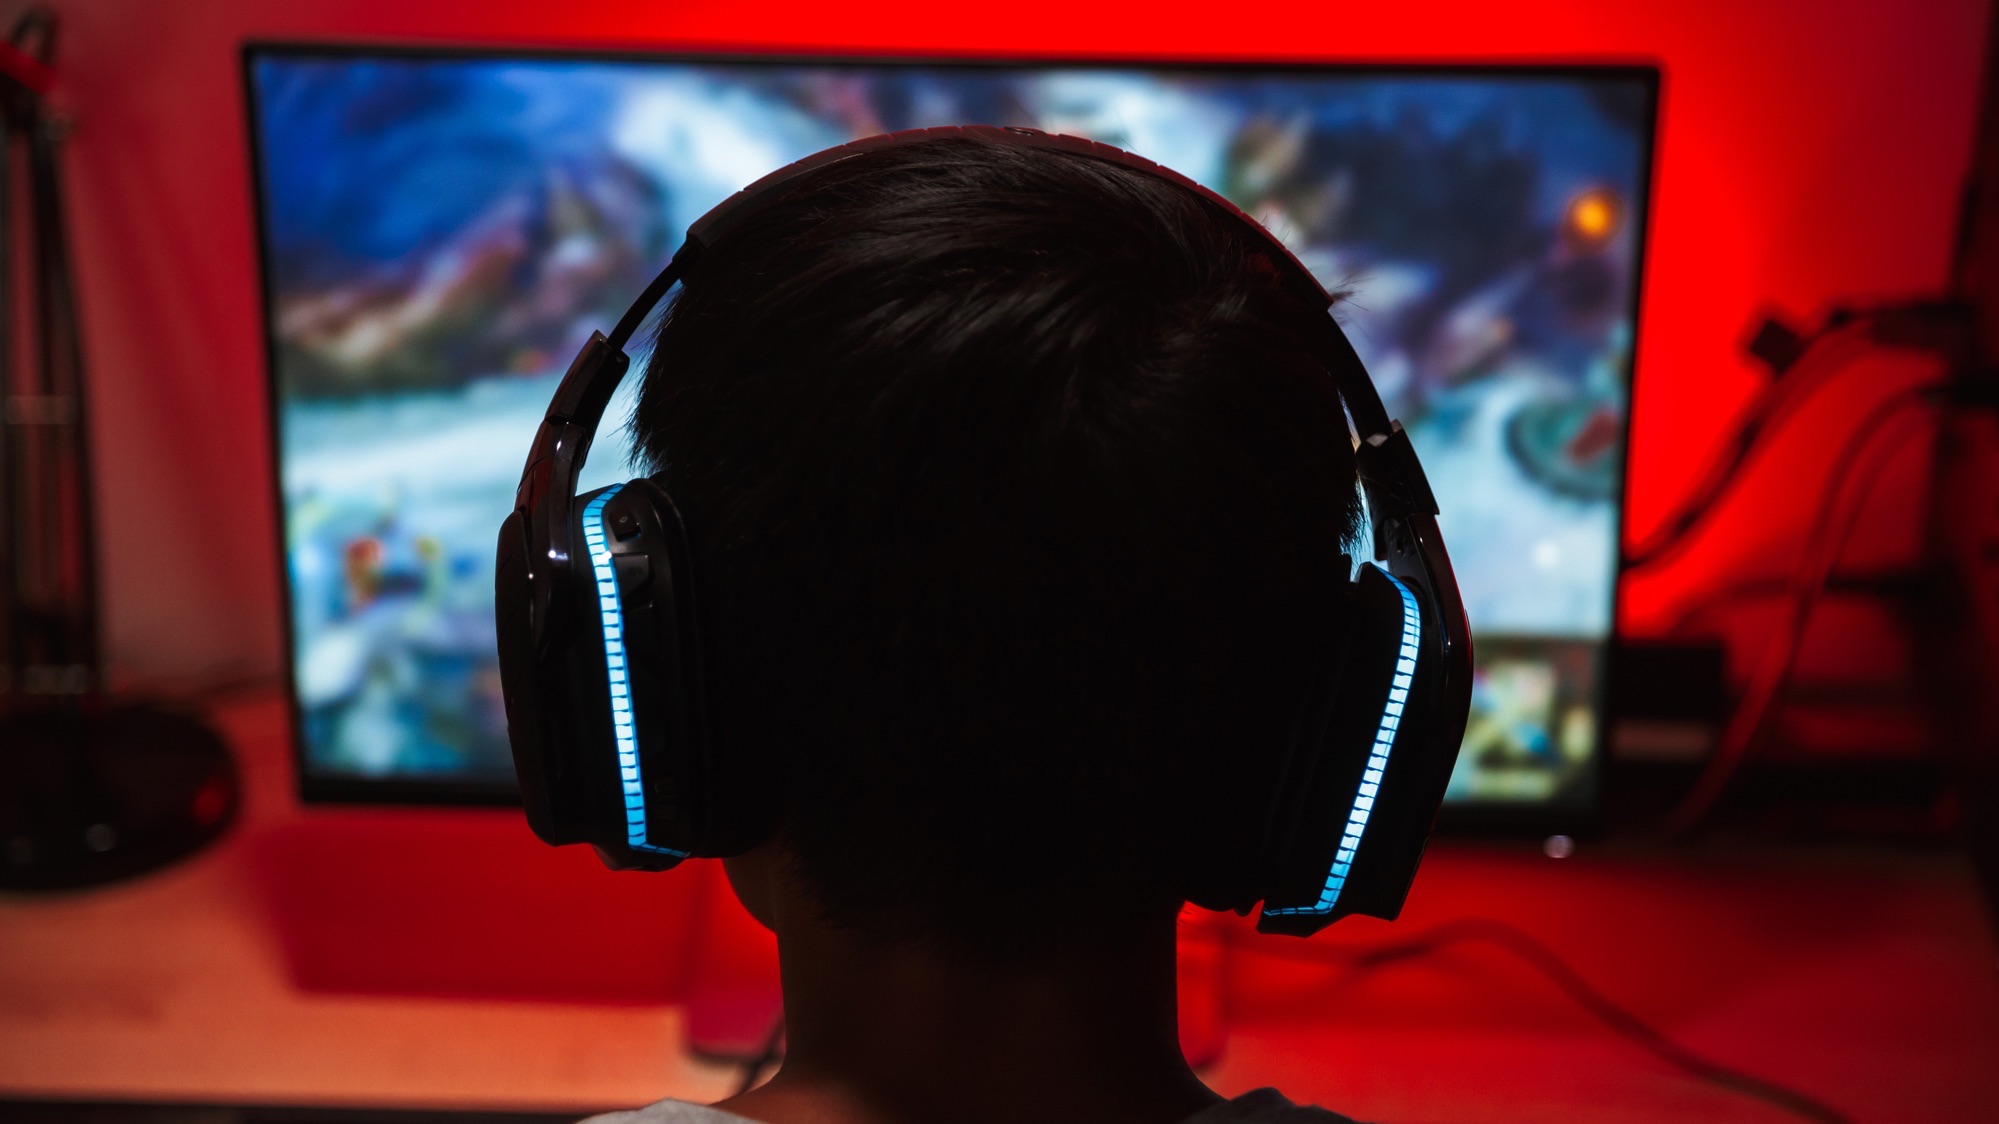 Portrait from back of young gamer guy looking at screen, and playing video games on computer in dark room wearing headphones